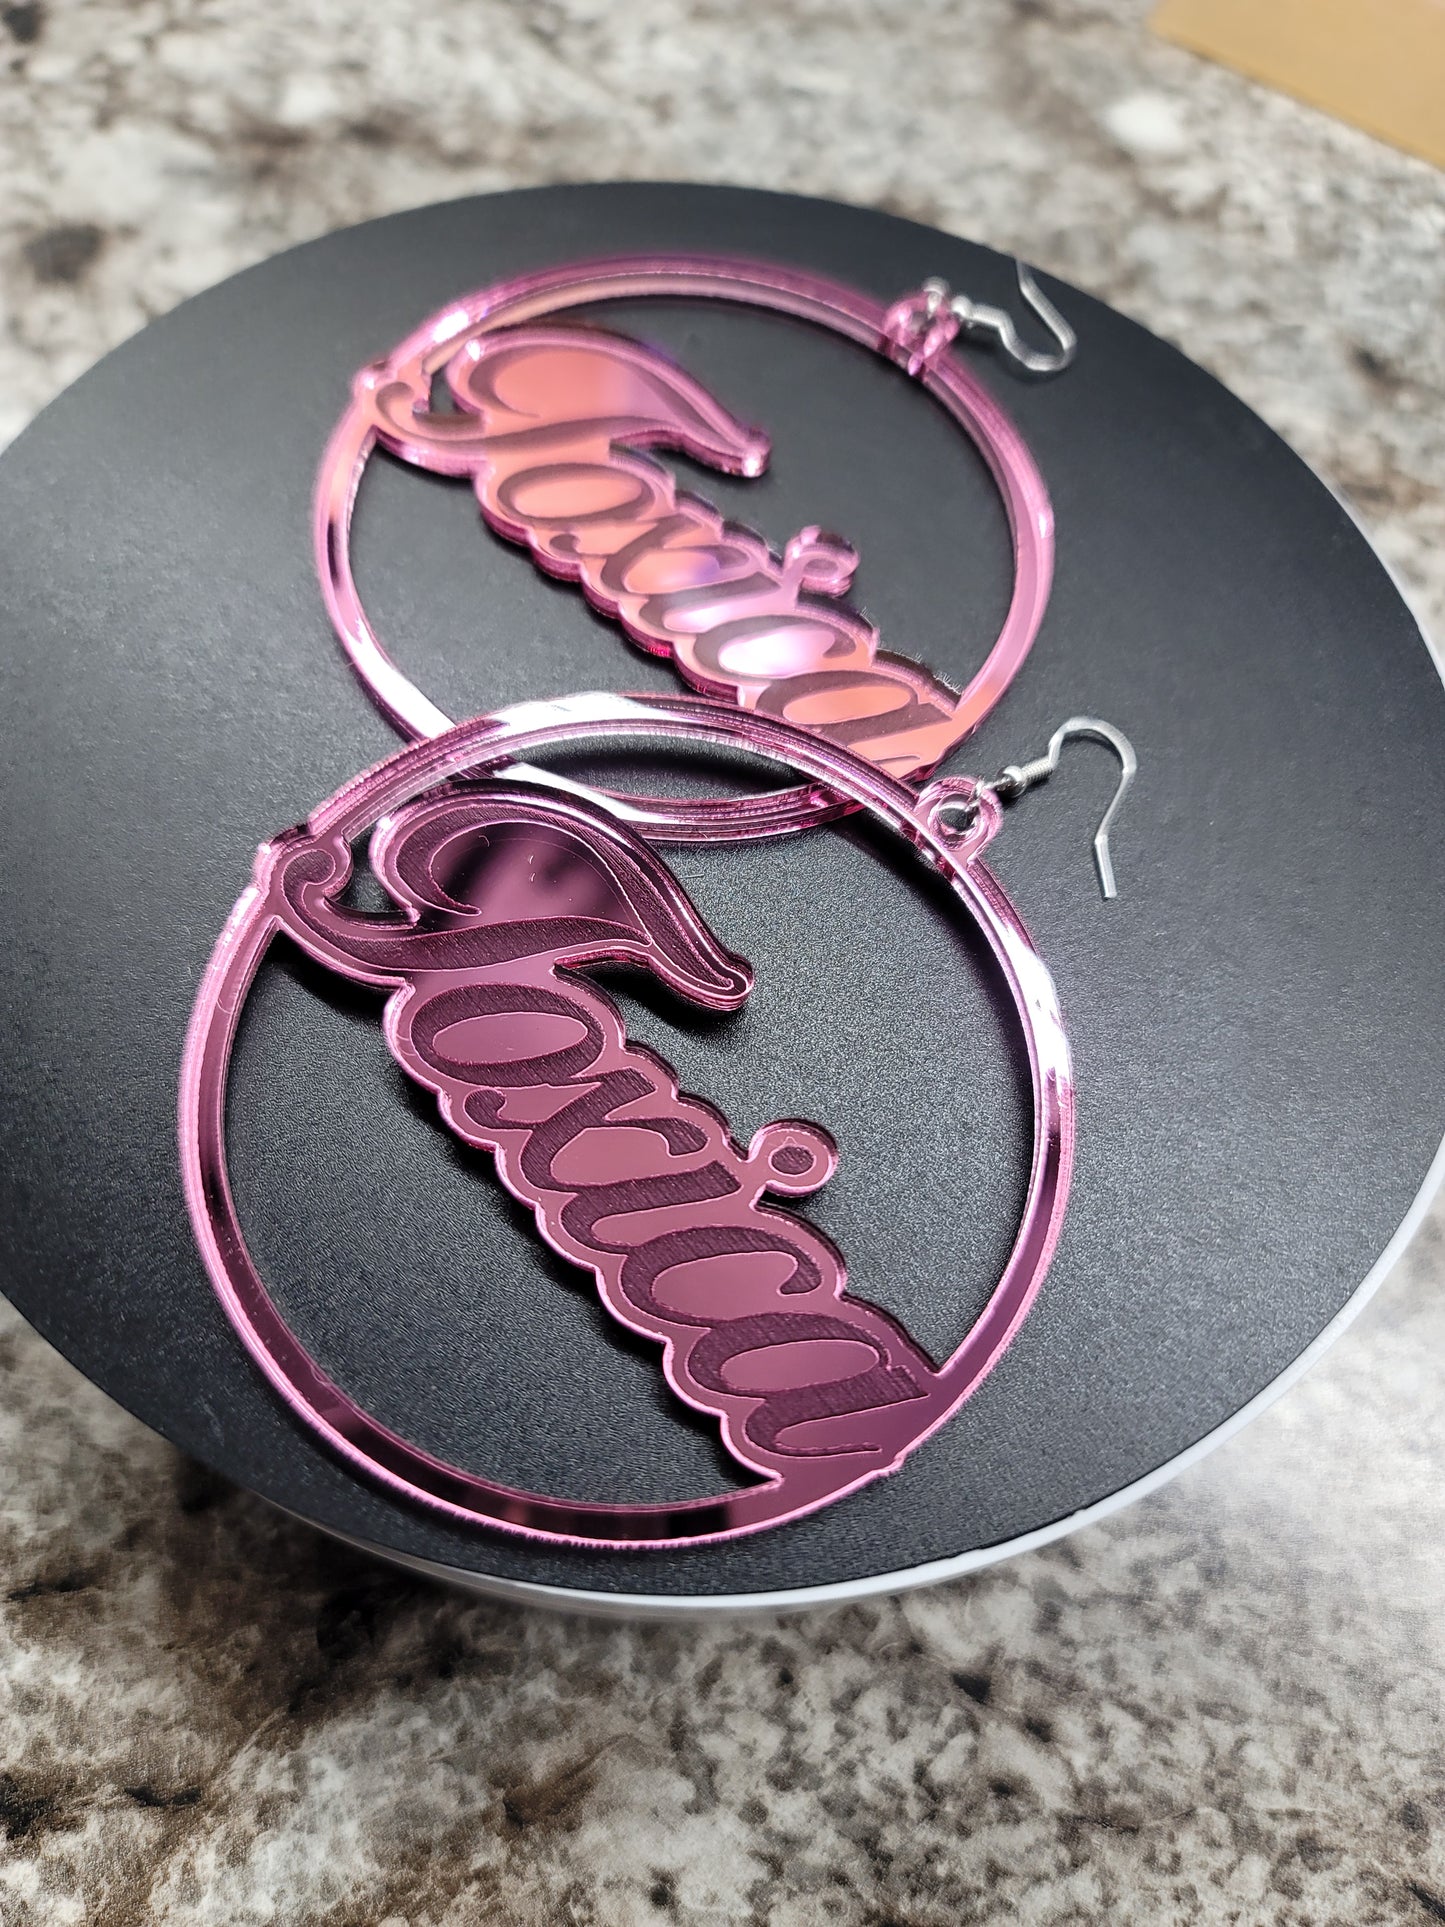 Toxica Earrings laser engraved on acrylic Pink mirror